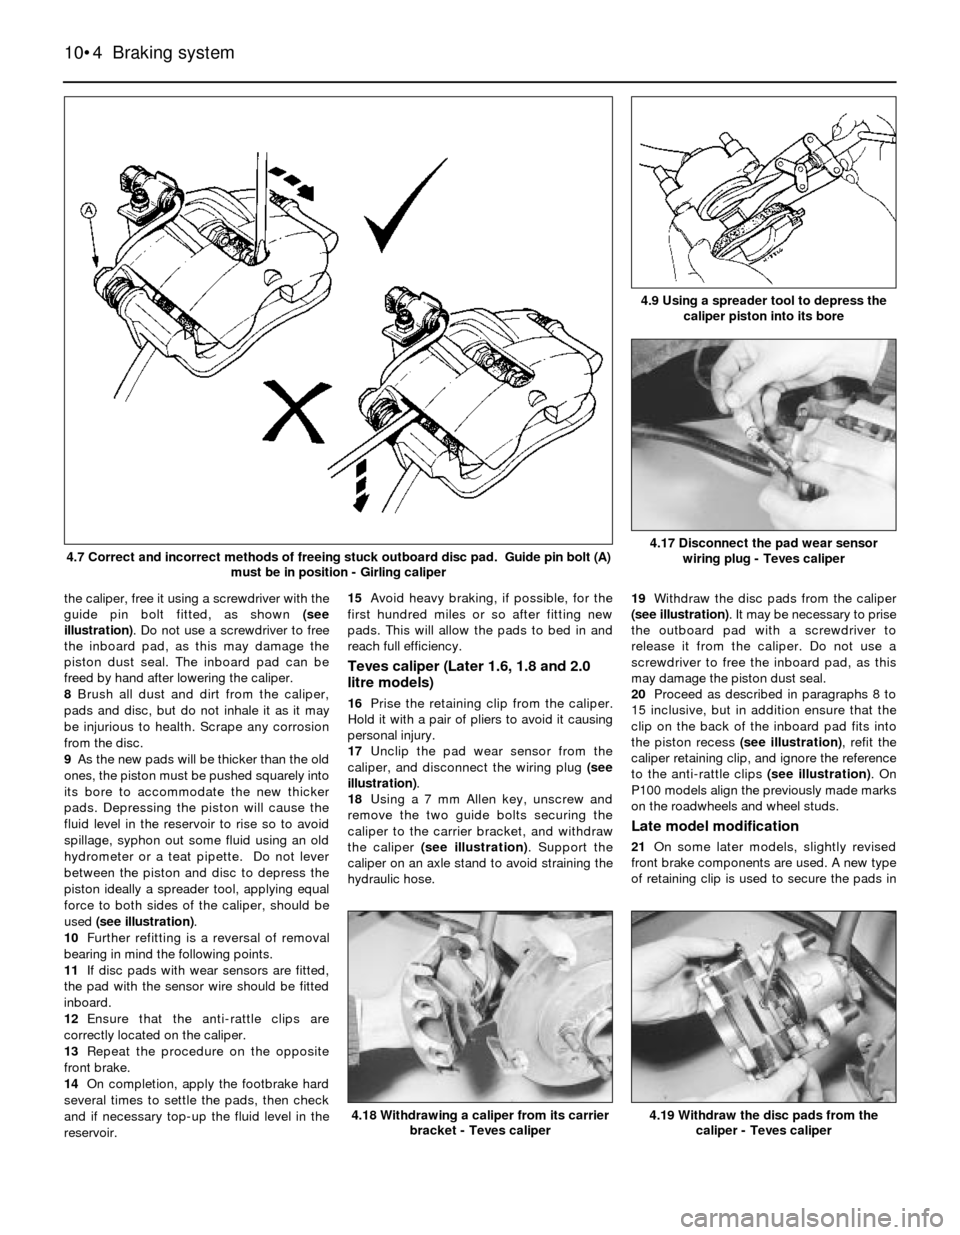 FORD SIERRA 1992 2.G Braking System Workshop Manual the caliper, free it using a screwdriver with the
guide pin bolt fitted, as shown (see
illustration). Do not use a screwdriver to free
the inboard pad, as this may damage the
piston dust seal. The inb